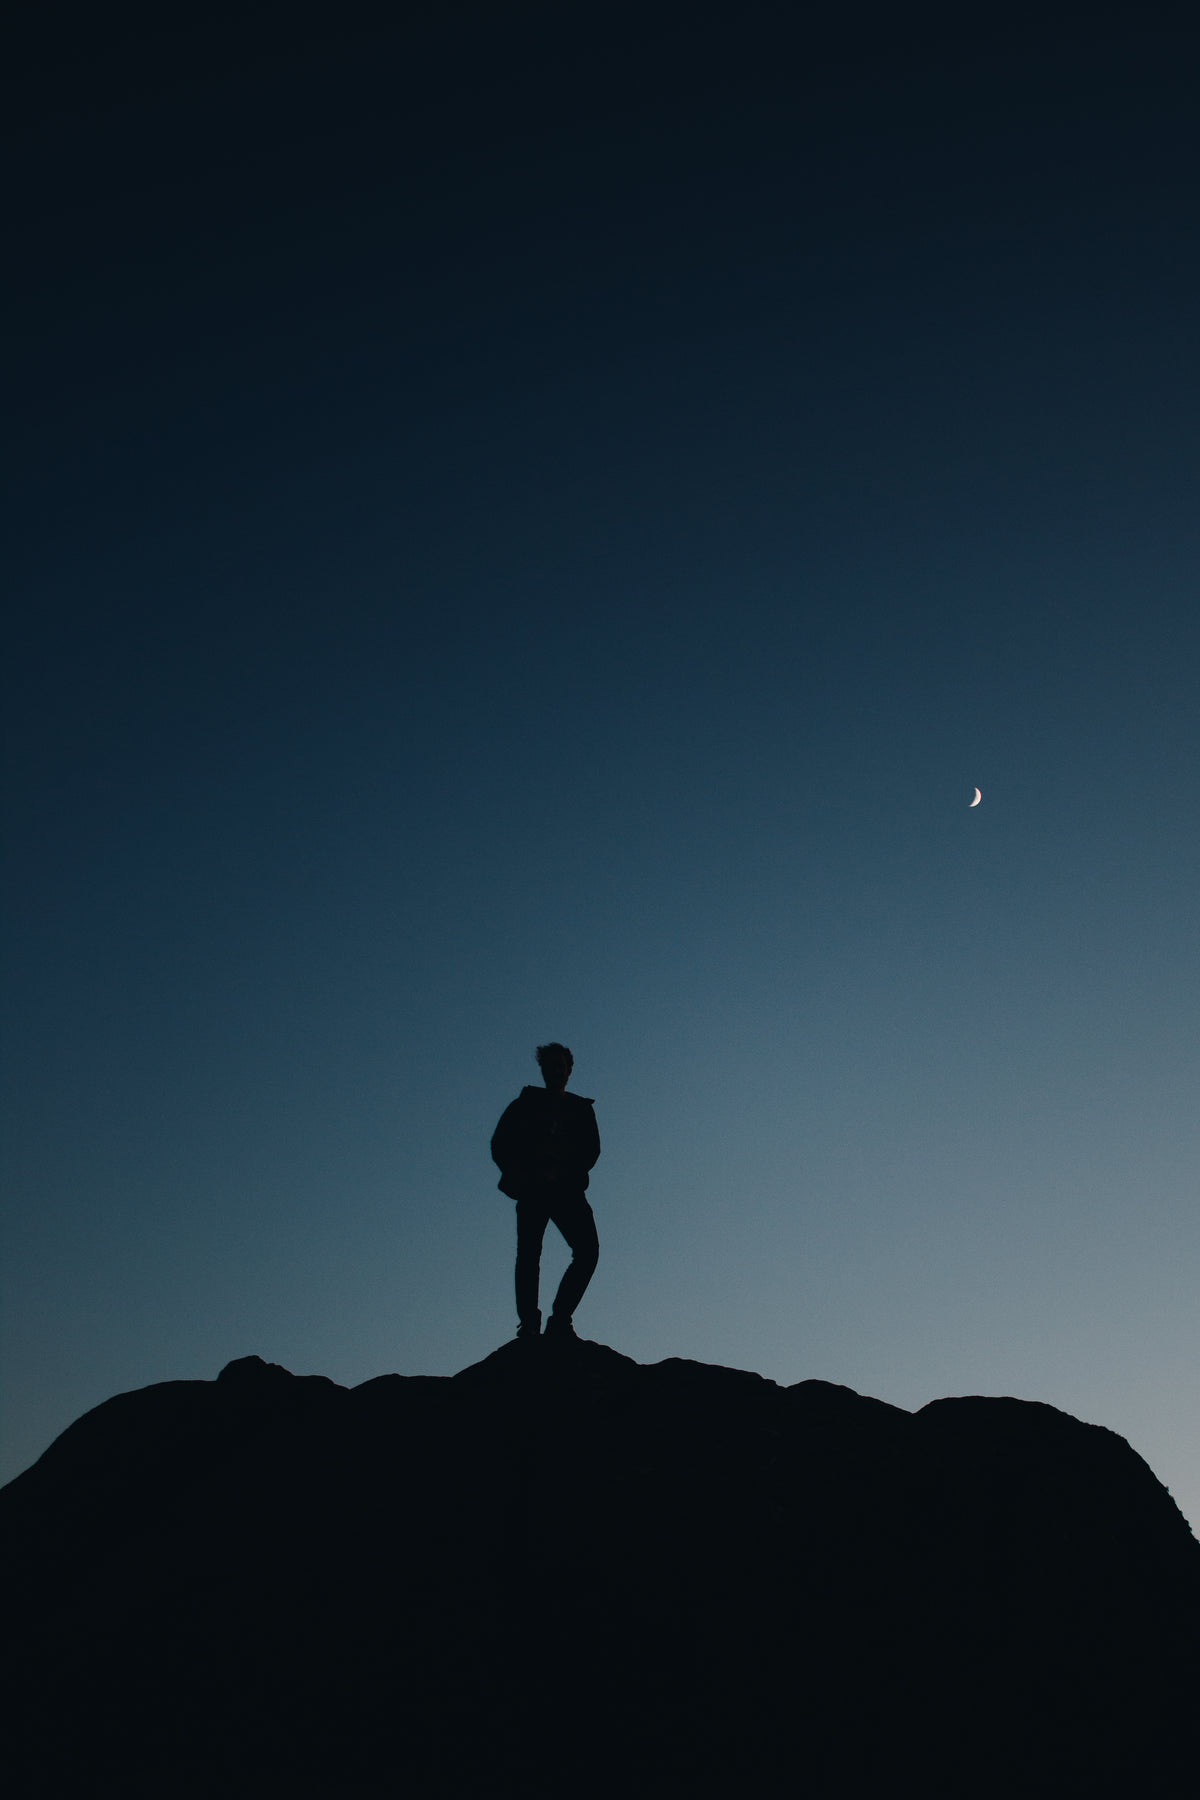 silhouette of a person below crescent moon